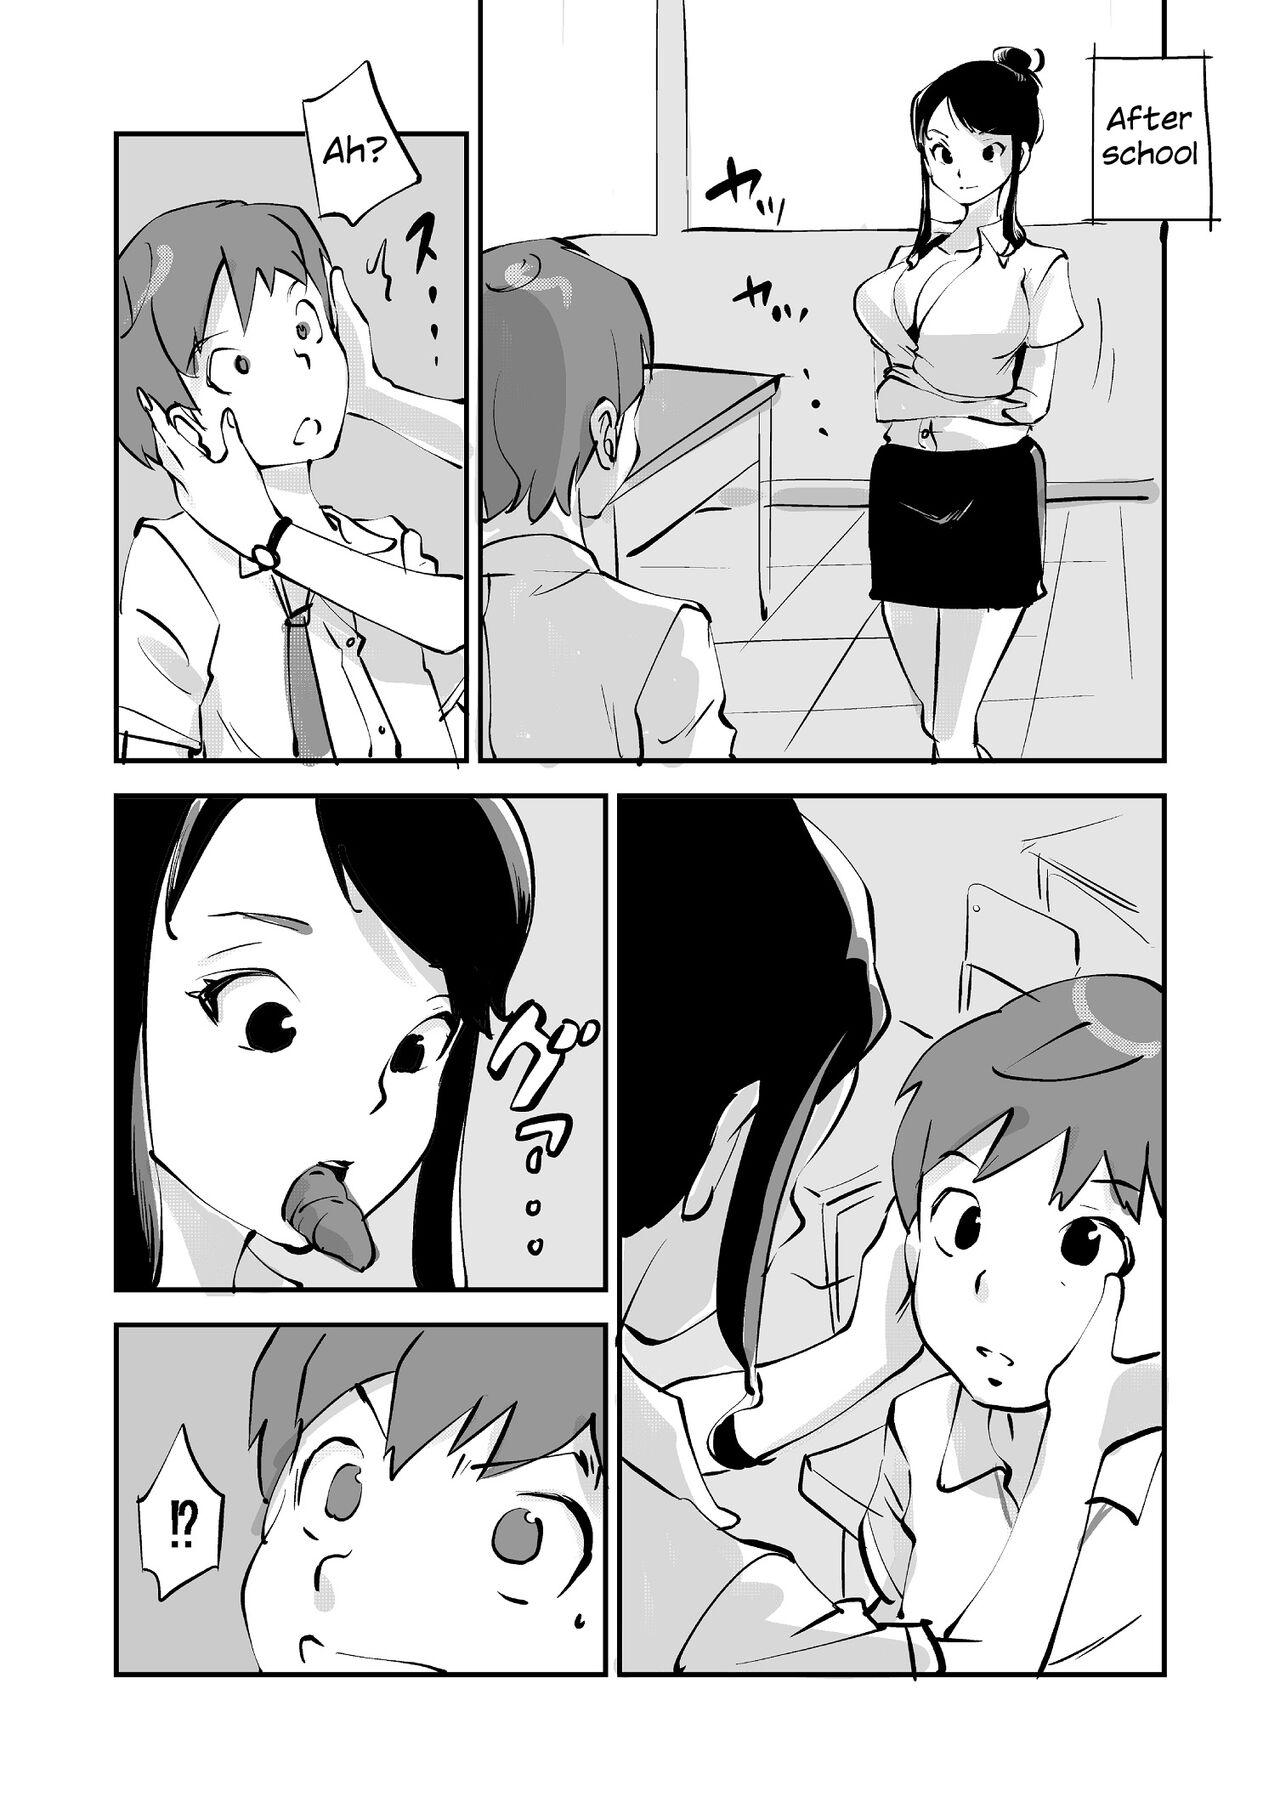 The Flesh Swapper Manga Best Blowjobs Ever - Picture 3